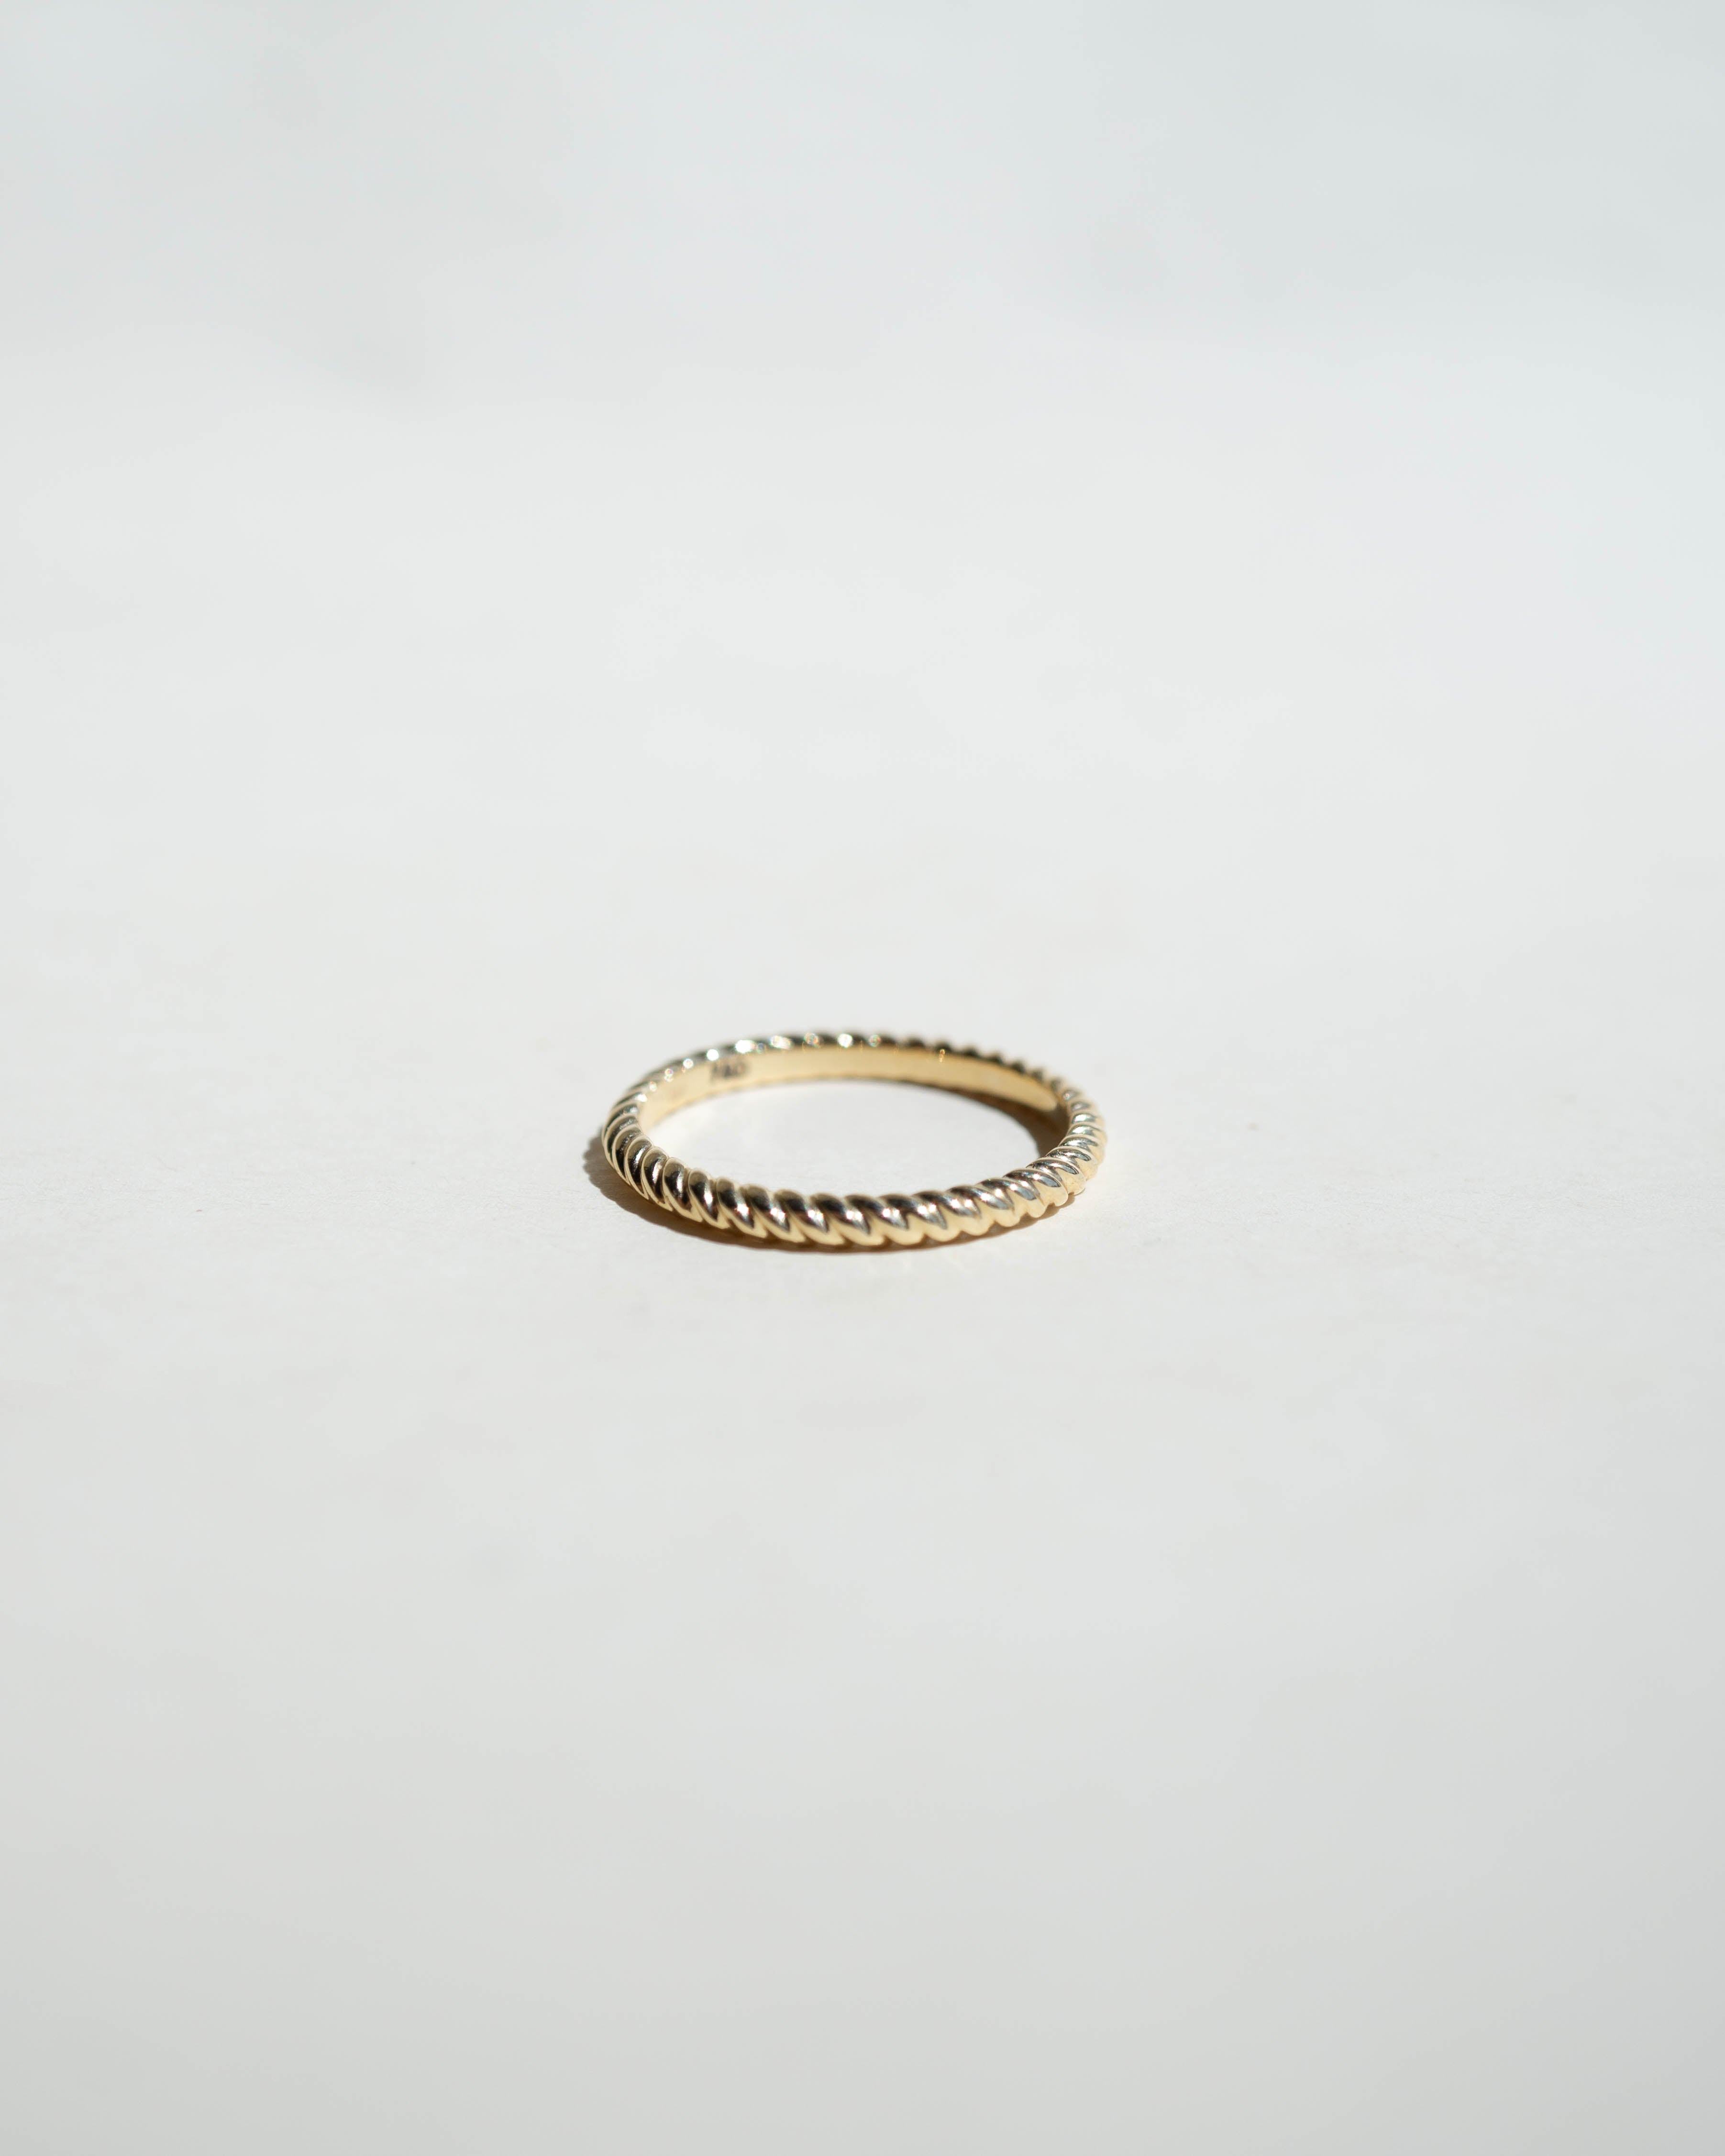 Buy Twisted Rope Wedding Band, 18k yellow gold band ring online at  aStudio1980.com